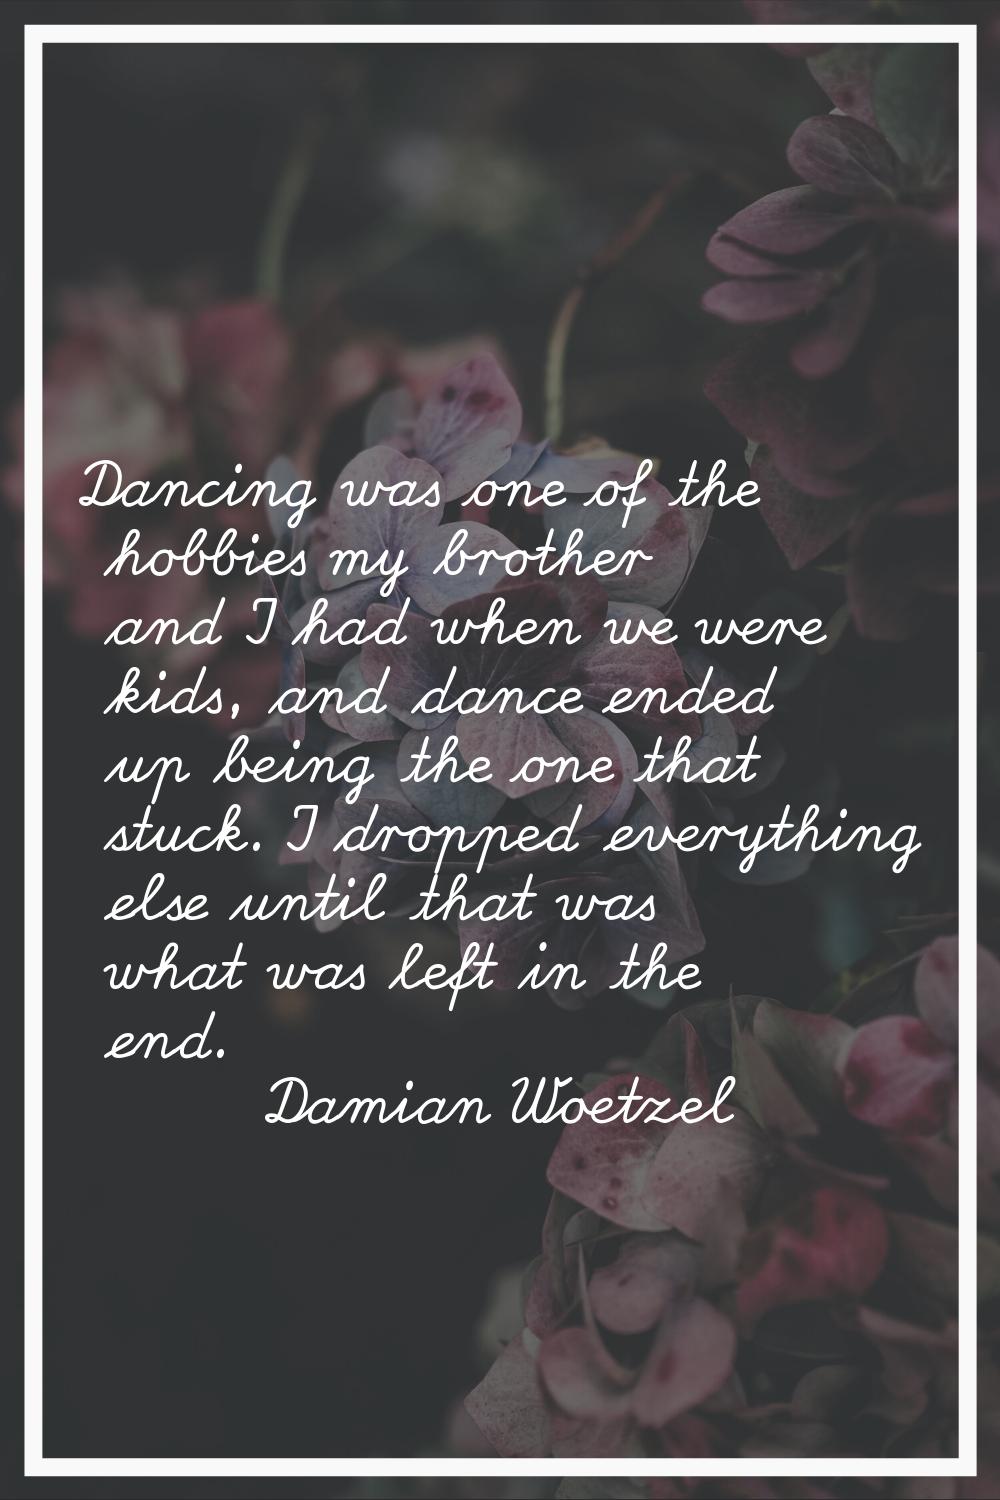 Dancing was one of the hobbies my brother and I had when we were kids, and dance ended up being the